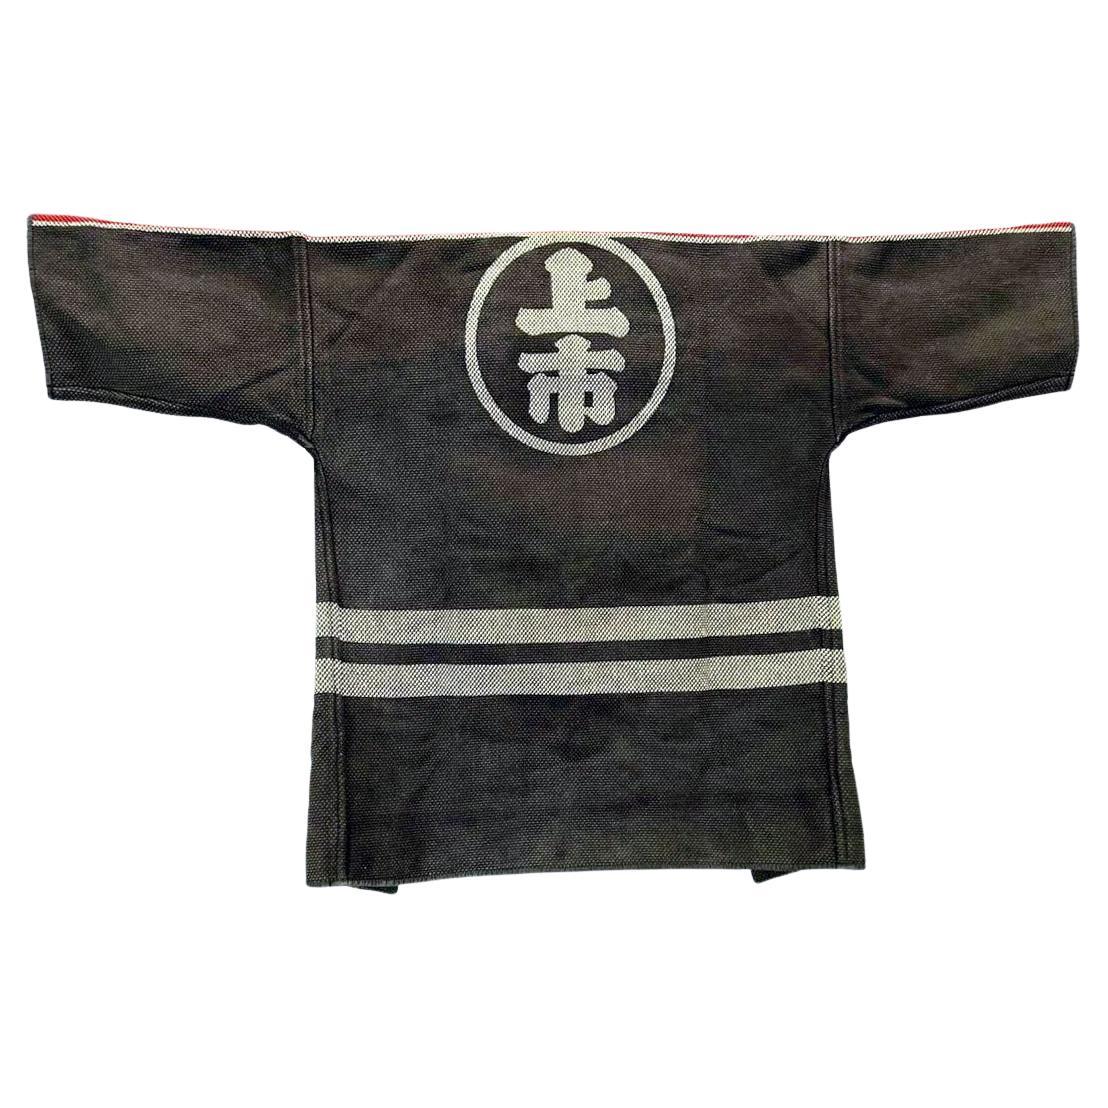 A vintage Japanese Fireman's Jacket (known as hikeshi-banten in Japanese) woven with heavy cotton and decorated with stencil resist dye circa 1920s Showa Period. These types of jackets were traditionally worn by firemen in Japan, a very important